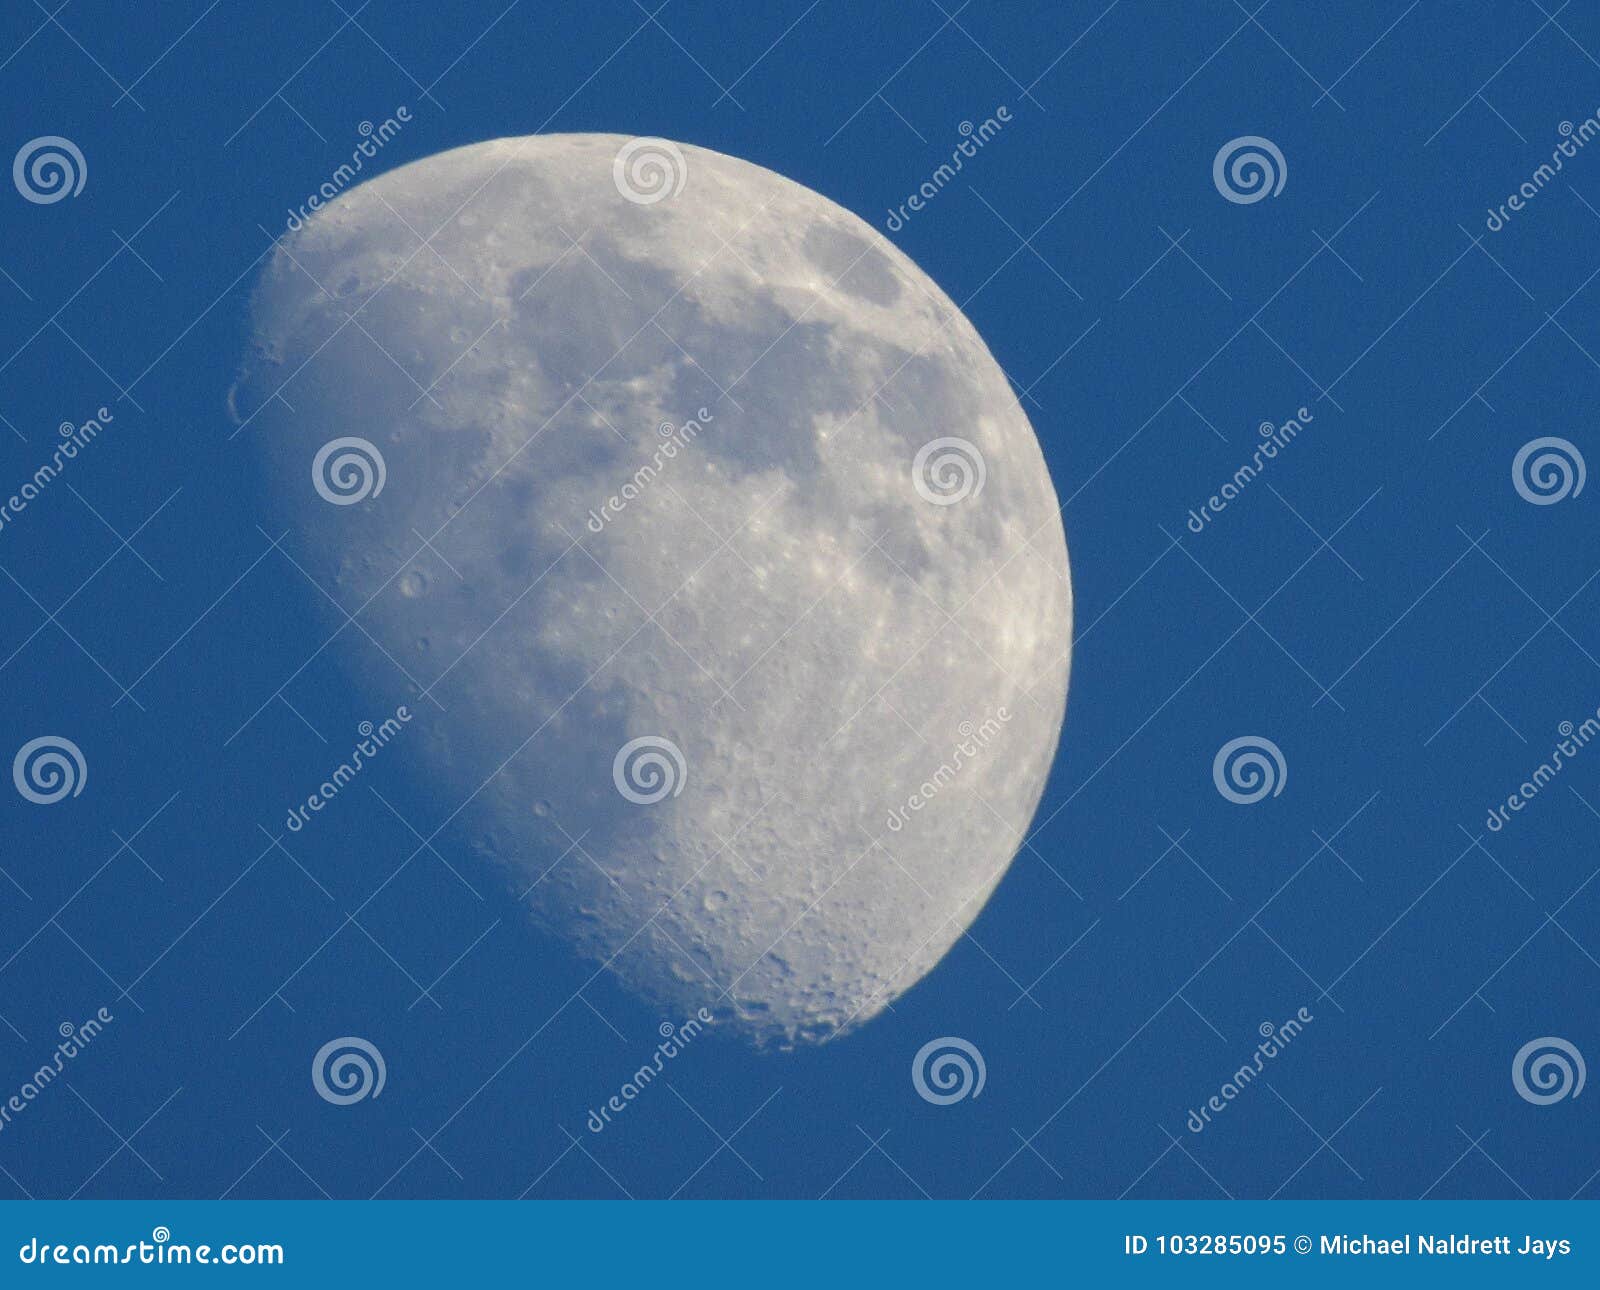 Moon at Dusk. Deep blue sky surrounding a well illuminated moon fading into the background. Displays a reasonable amount of the lunar surface including craters and dark spots